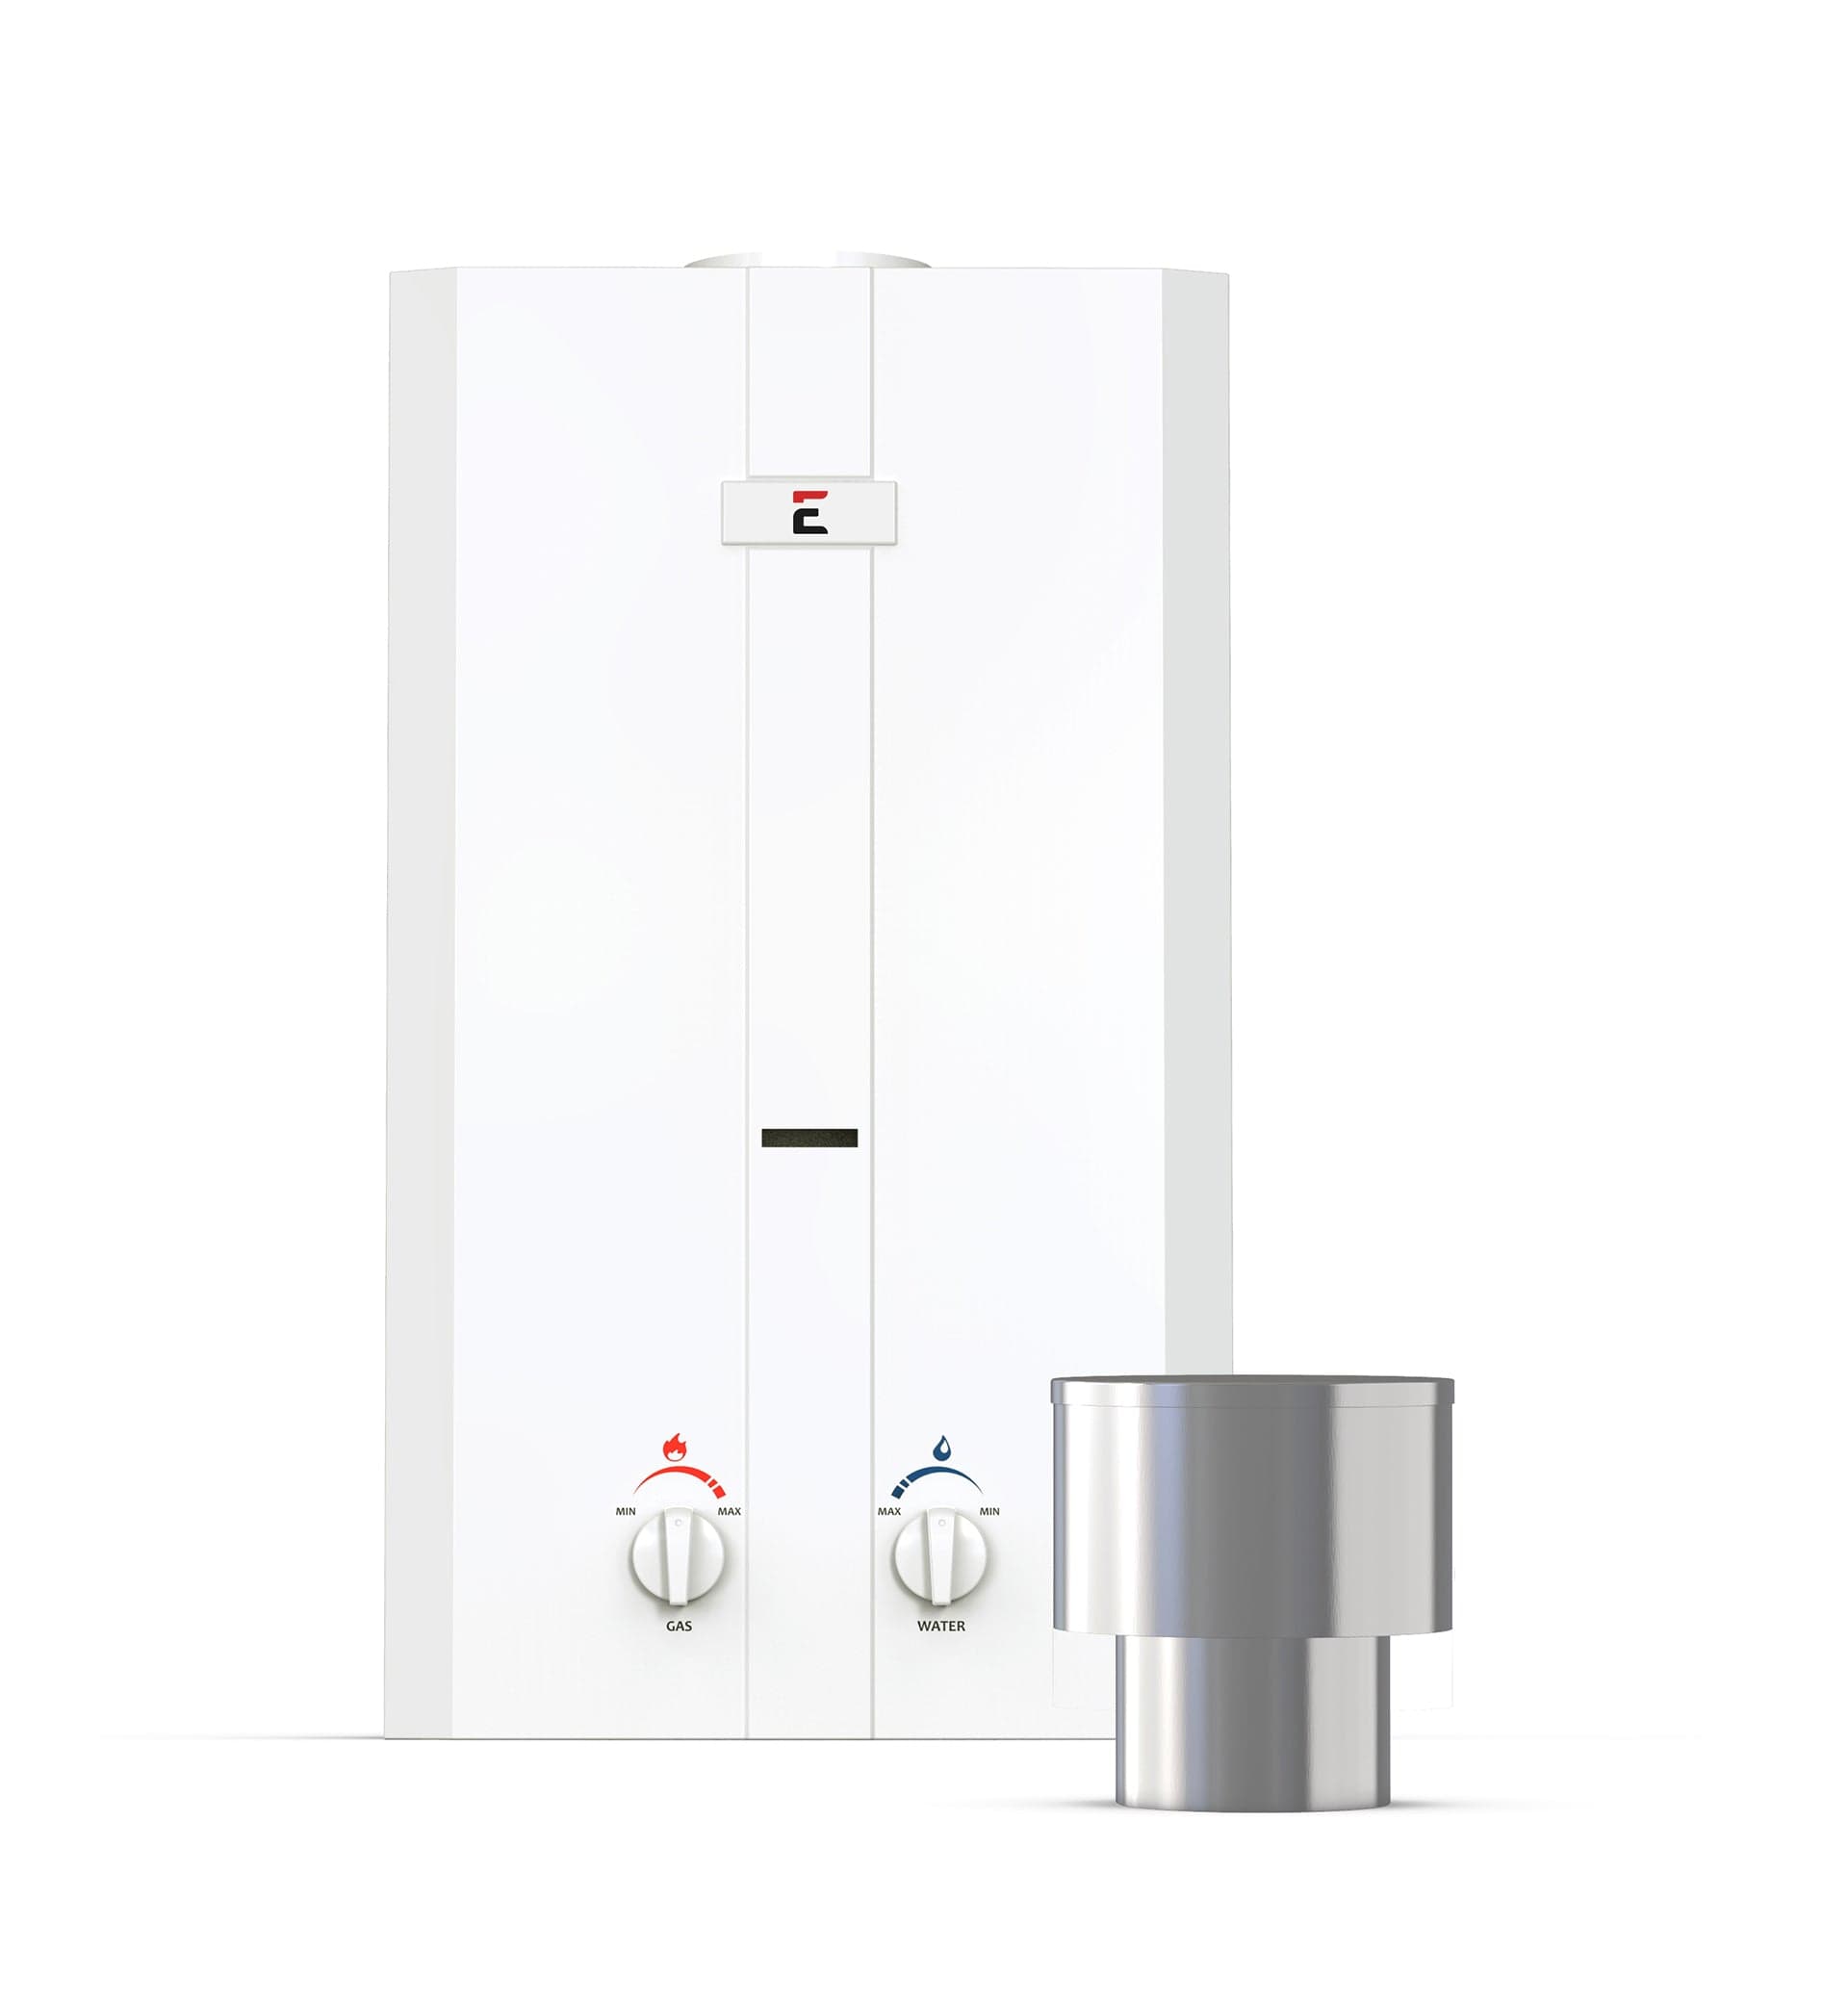 Eccotemp Heaters Eccotemp L10 Luxé 3.0 GPM Portable Outdoor Tankless Water Heater